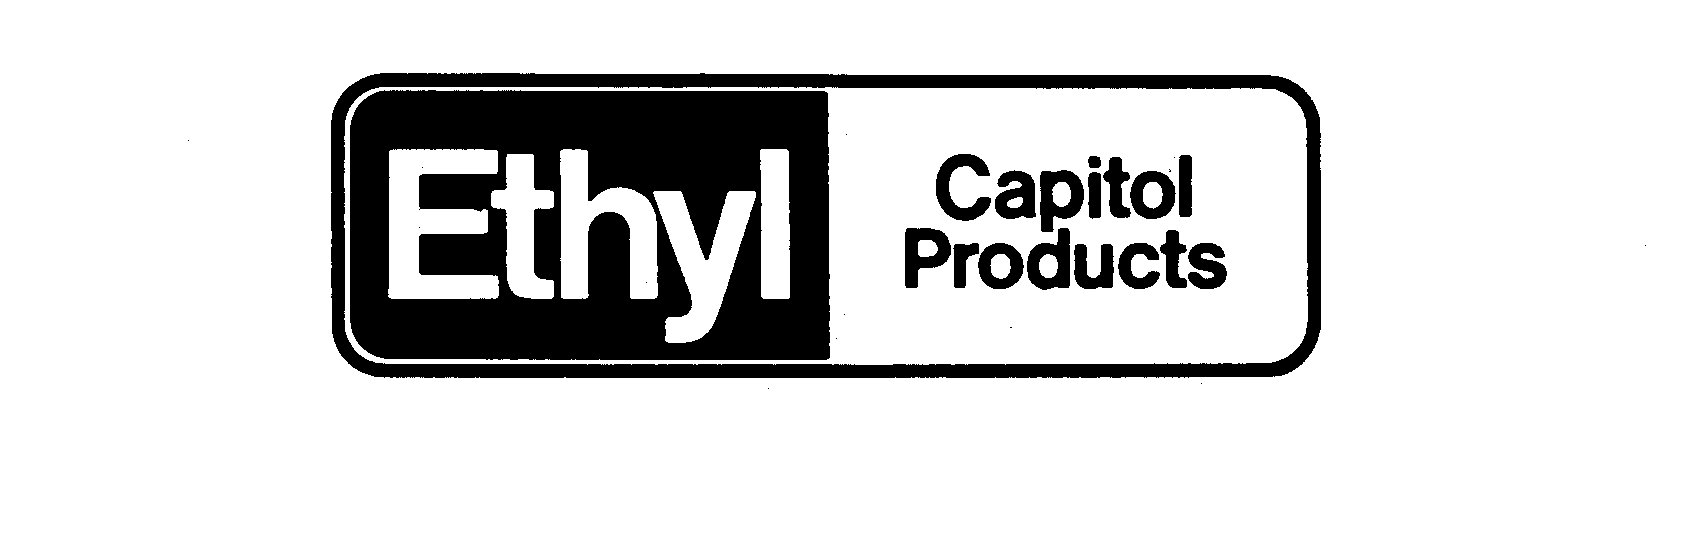  ETHYL CAPITOL PRODUCTS